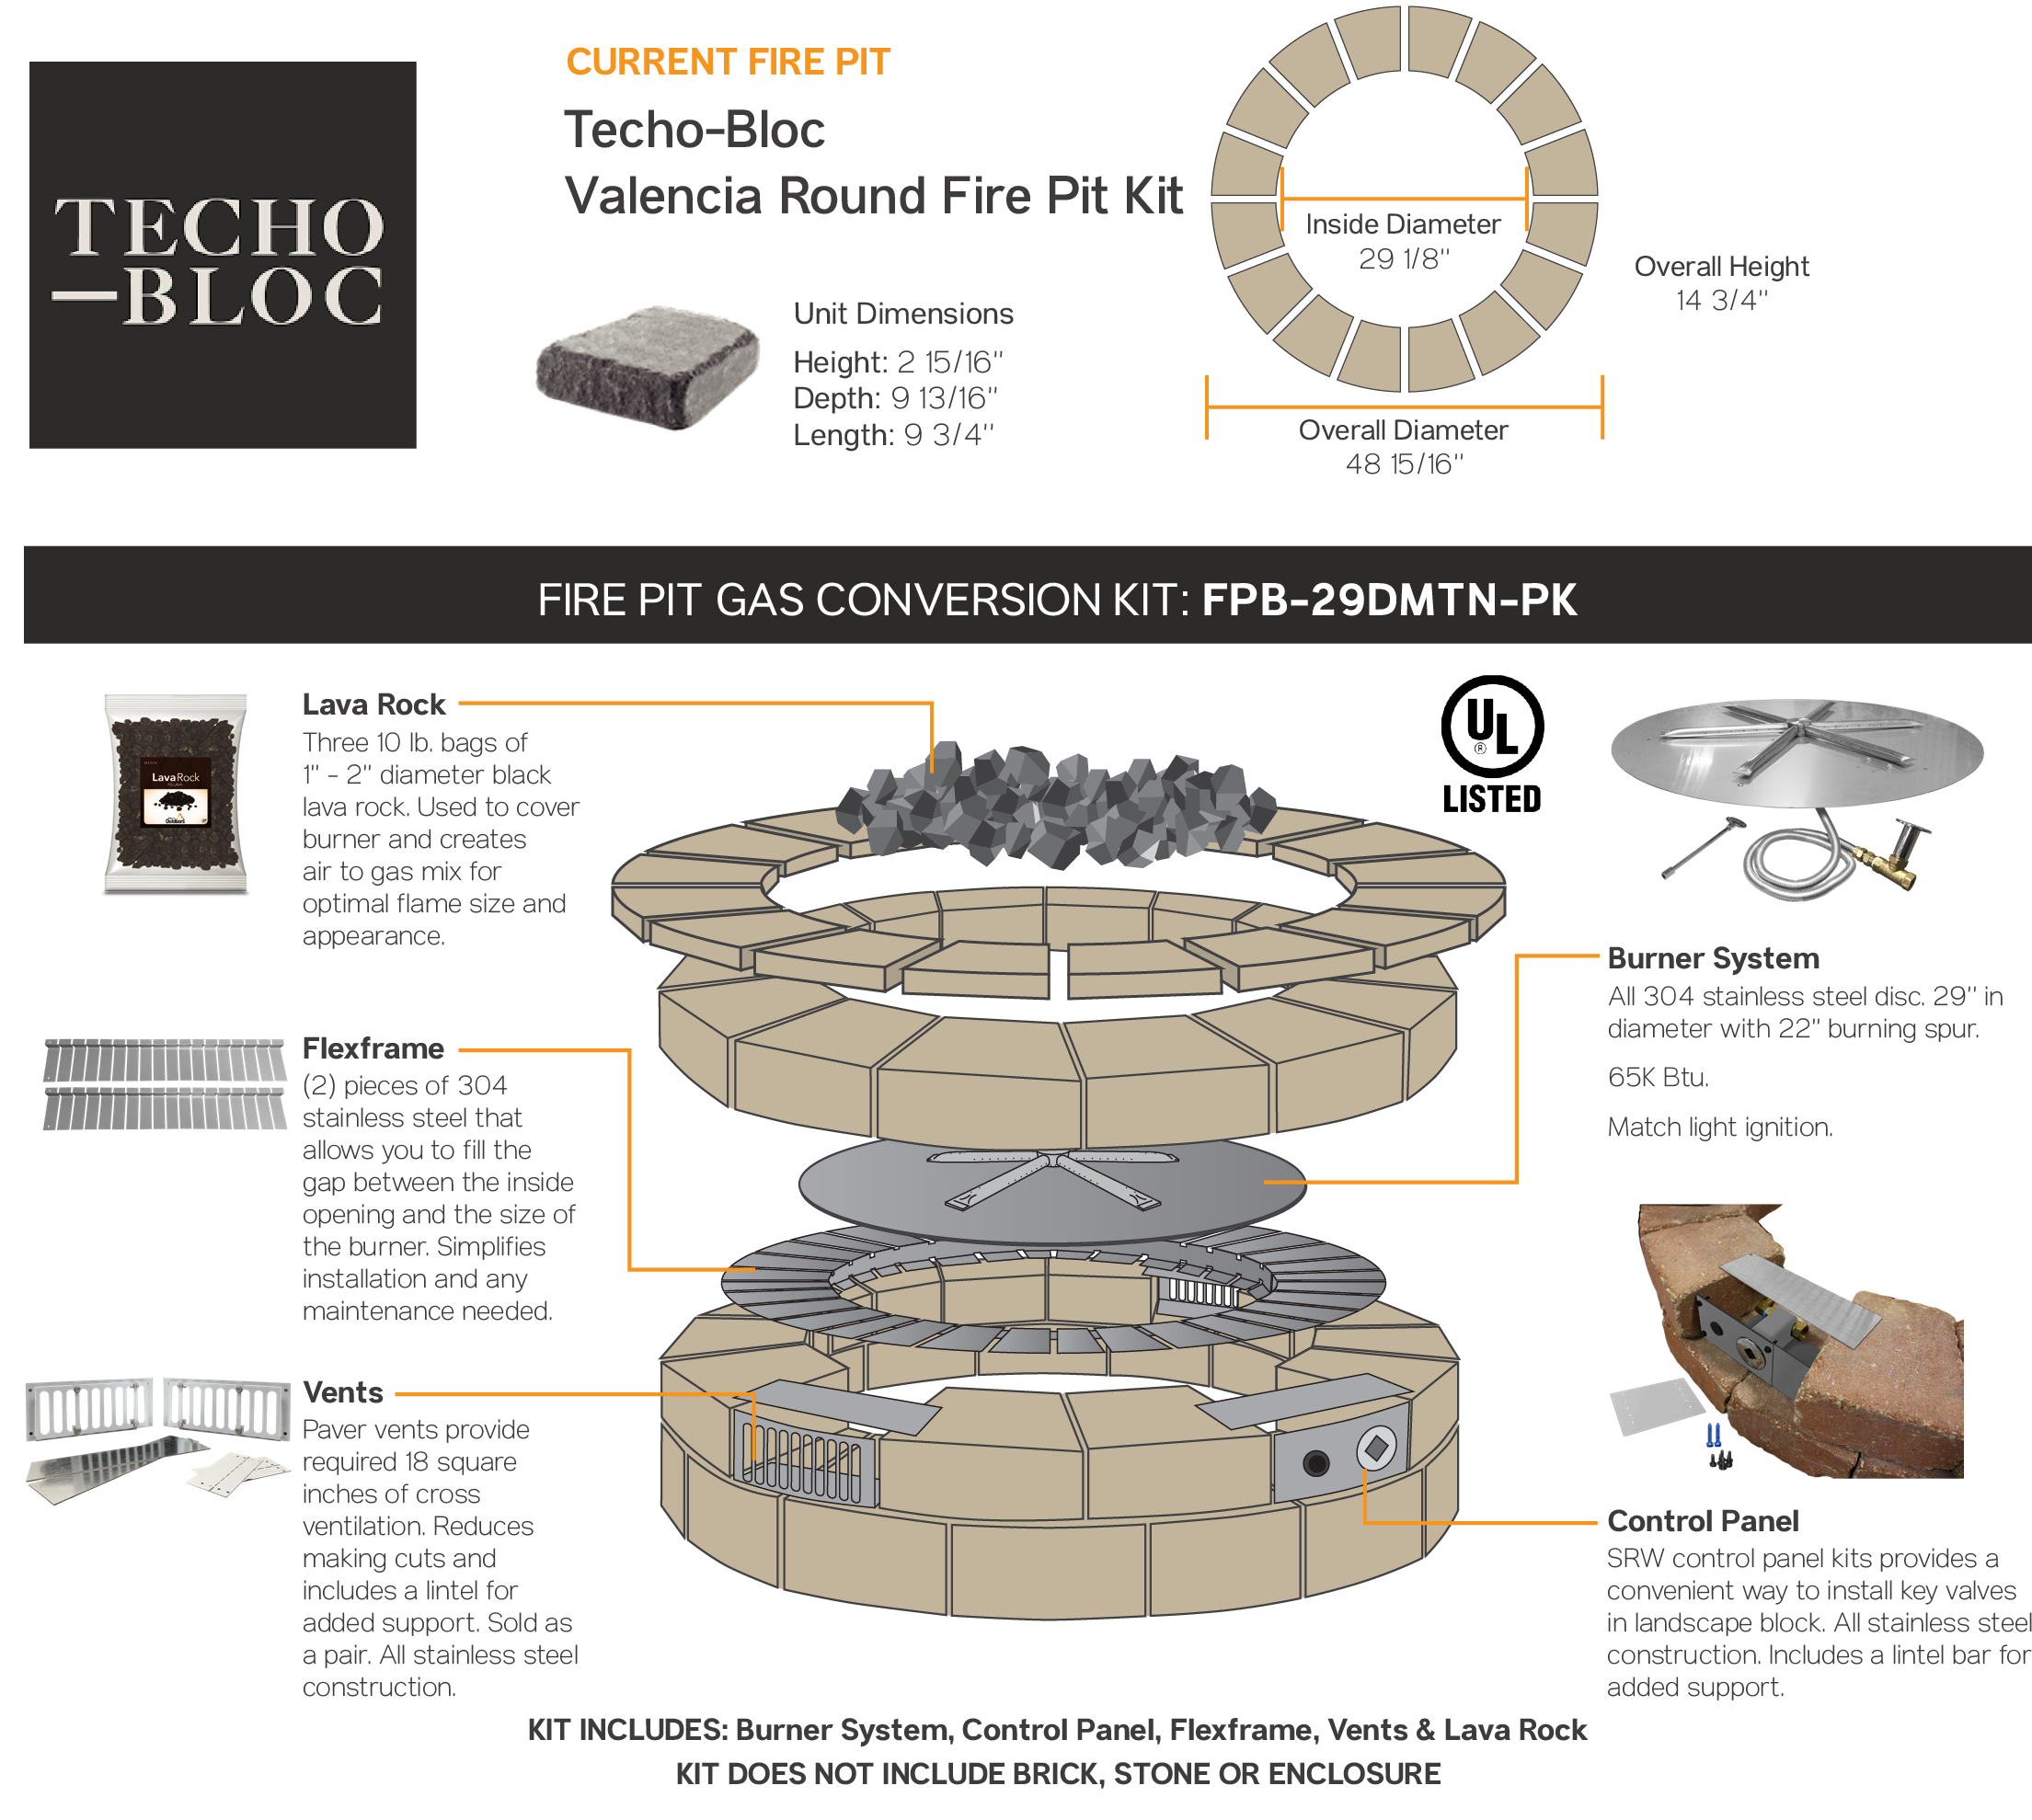 Gas Conversion Kit – Techo-Bloc Valencia Round Fire Pit – Fireboulder.com |  Natural Stone, Fire Pits, Fireplaces and more